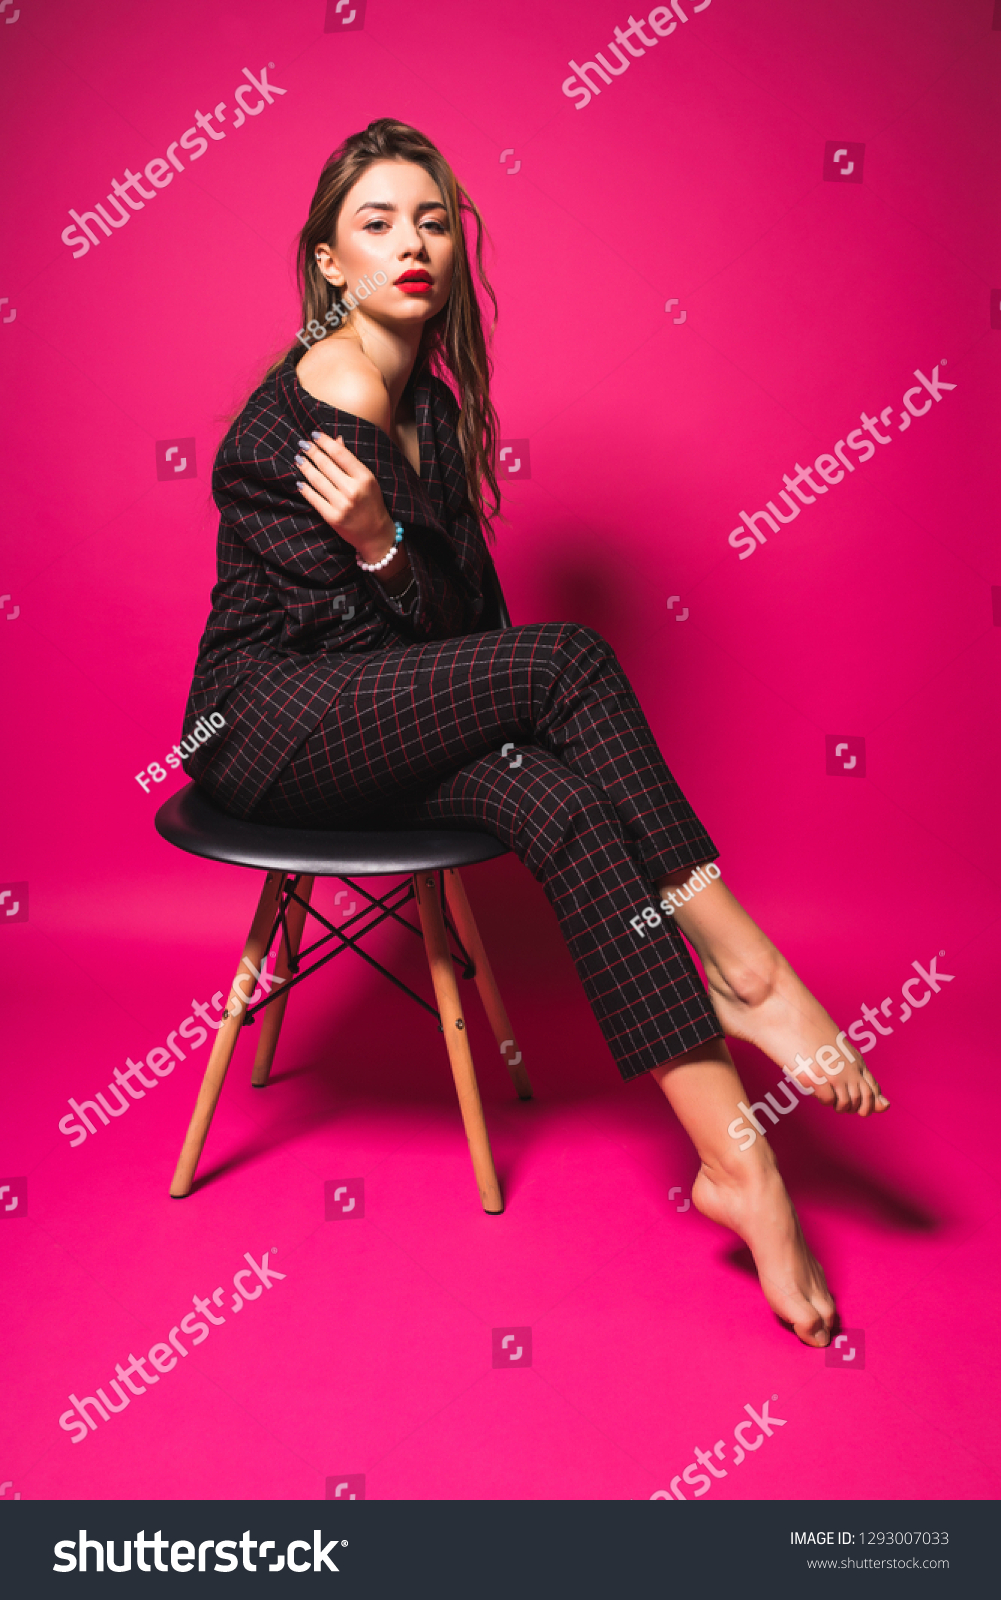 Fashion Model Style. Fashionable Woman In Stylish Clothes Posing On fashion Background In Studio. #1293007033